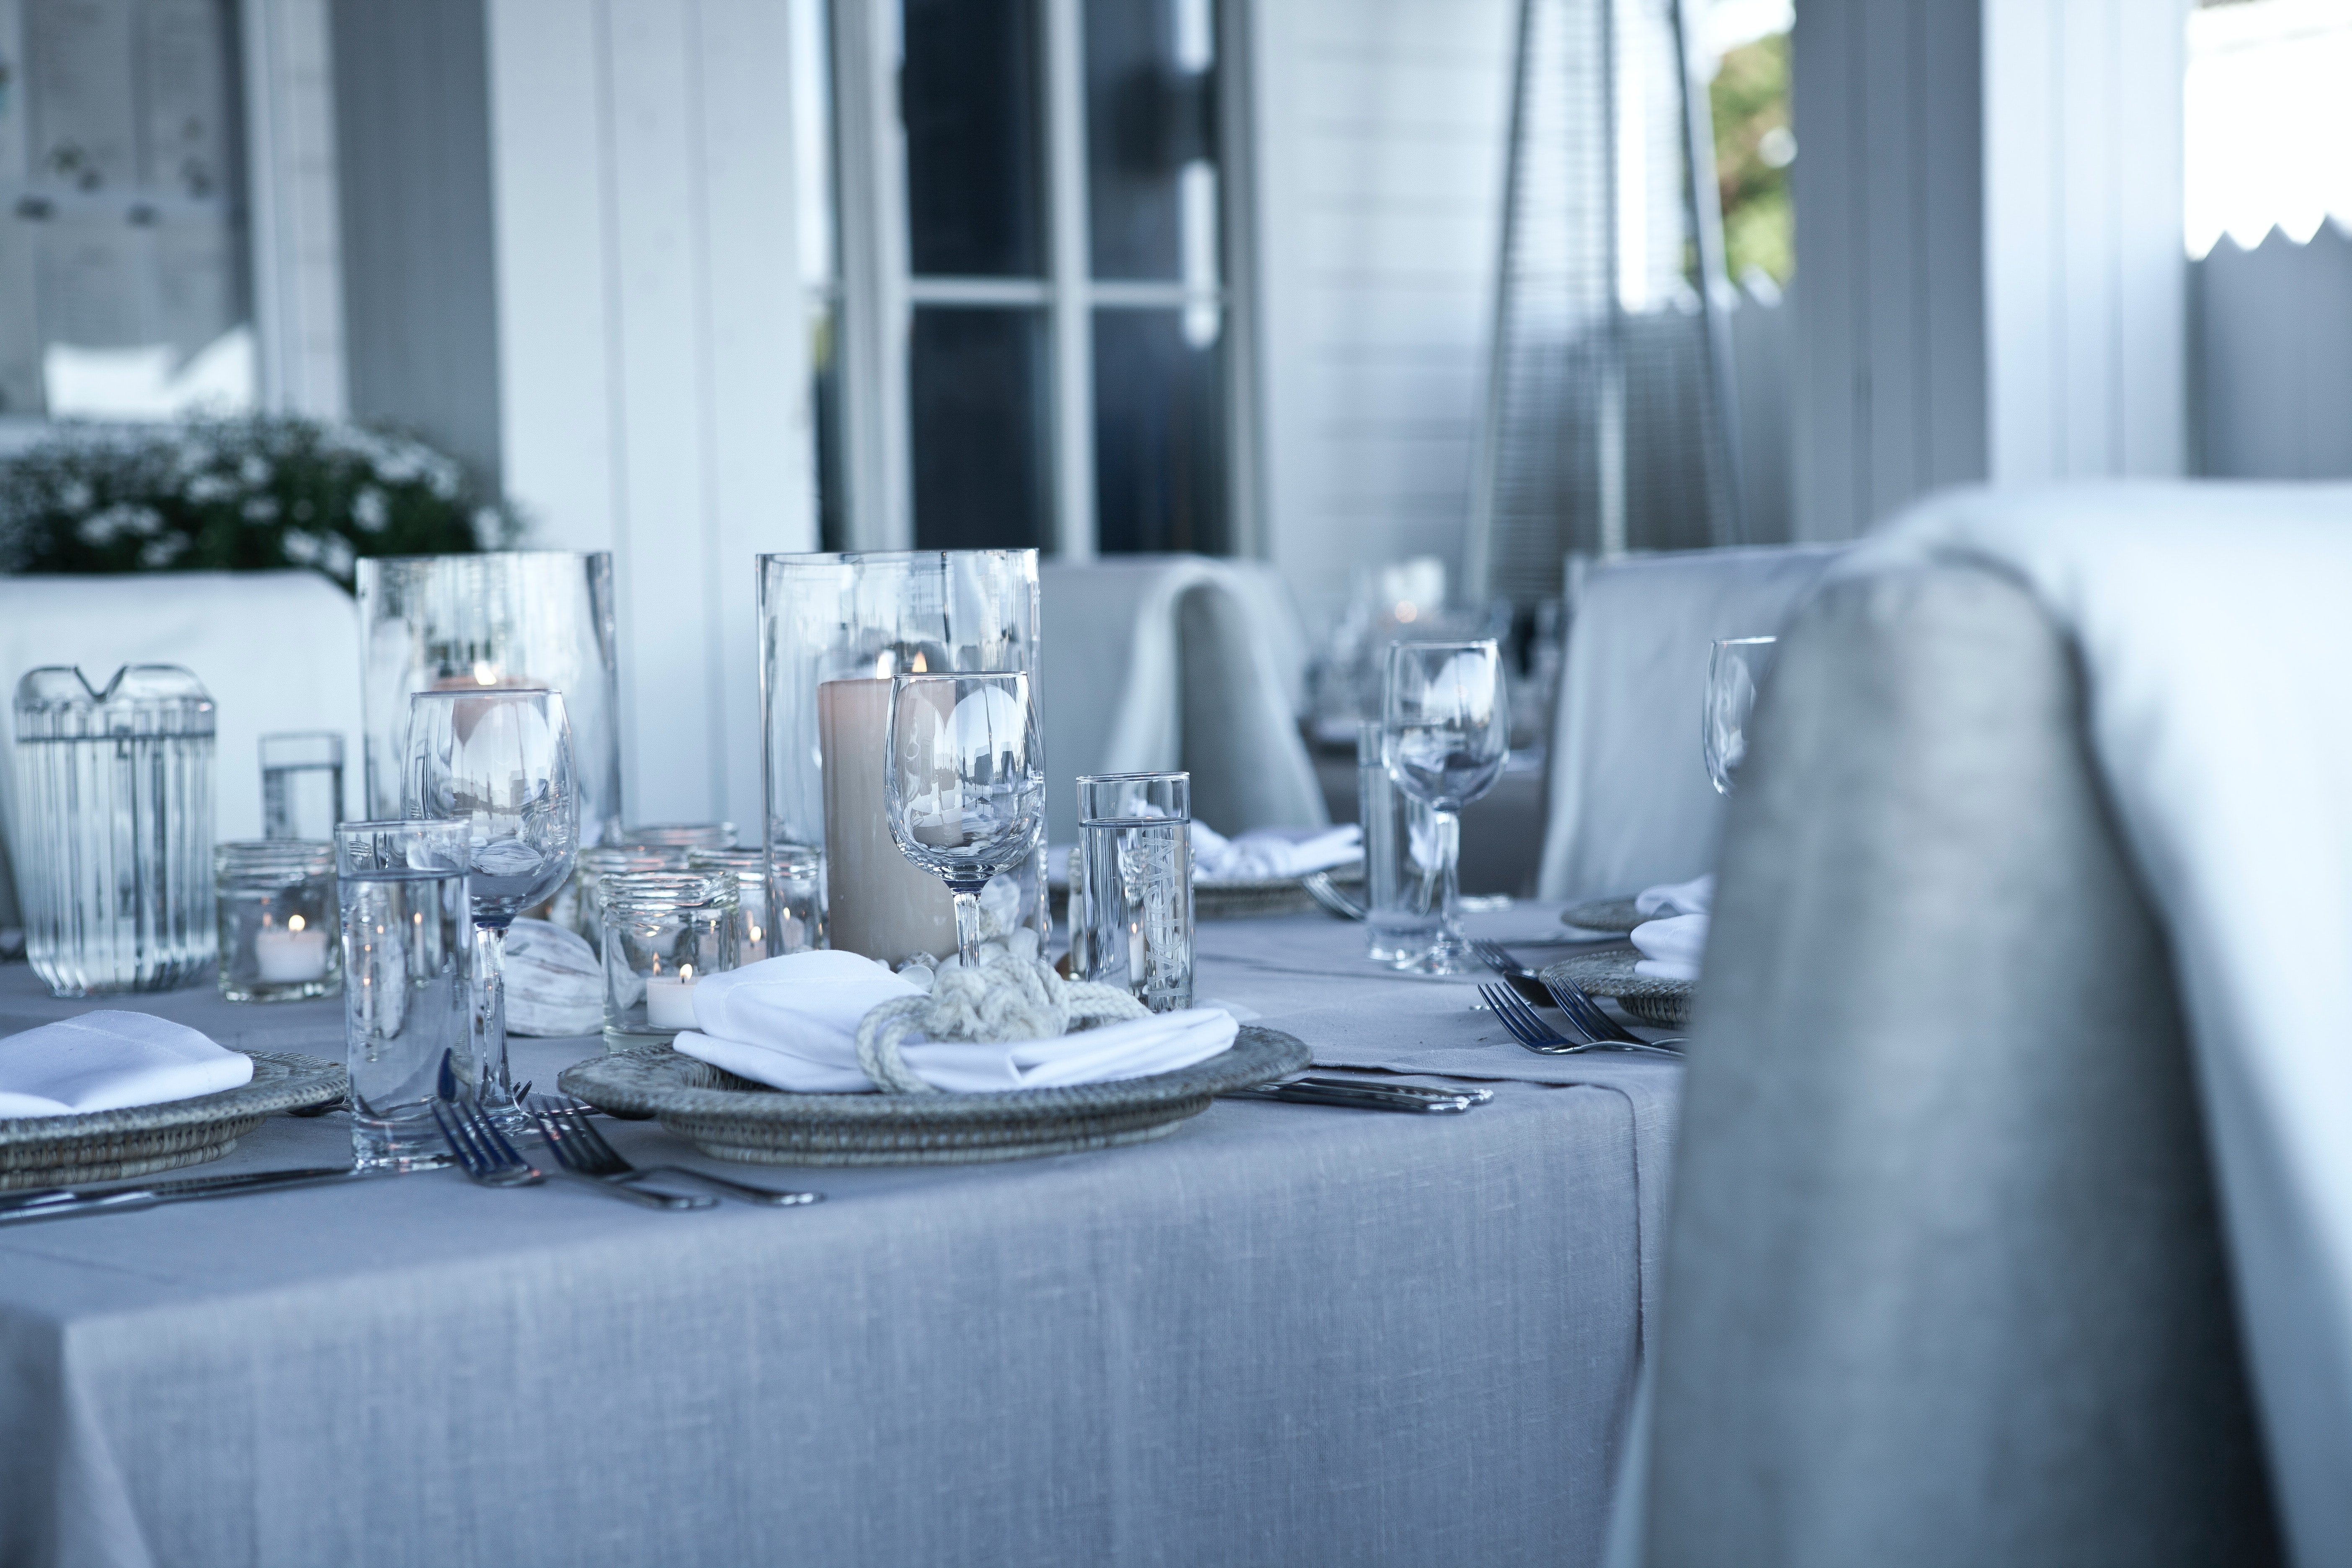 An image of clear glass dinnerware on top of a table which is covered by a gray table cloth | Source: Pexels 